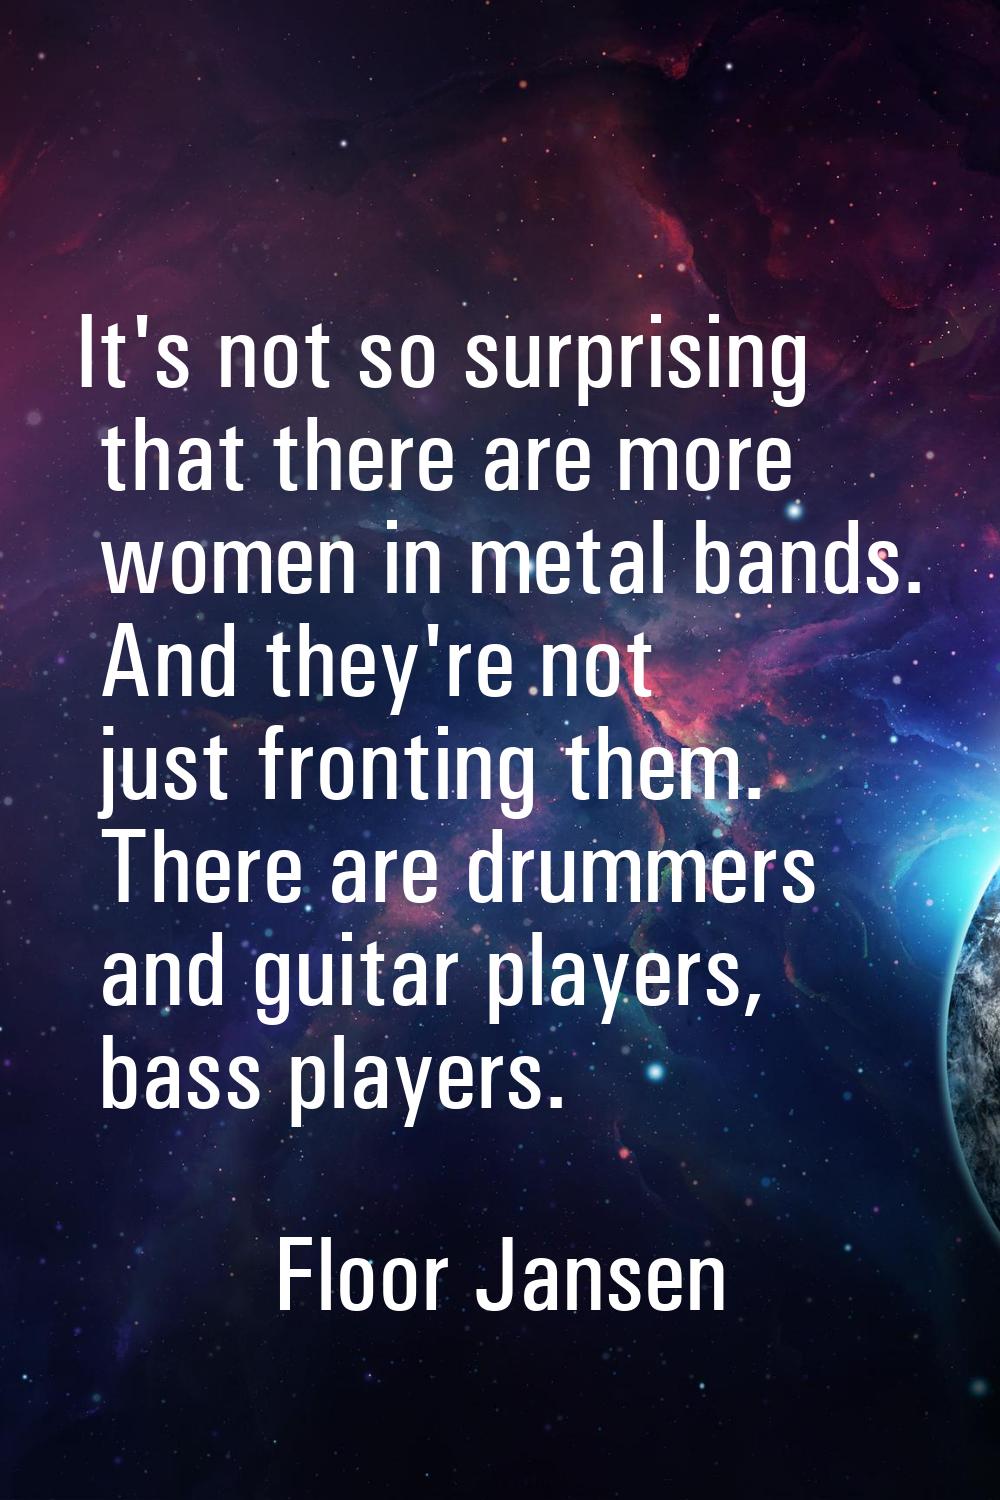 It's not so surprising that there are more women in metal bands. And they're not just fronting them